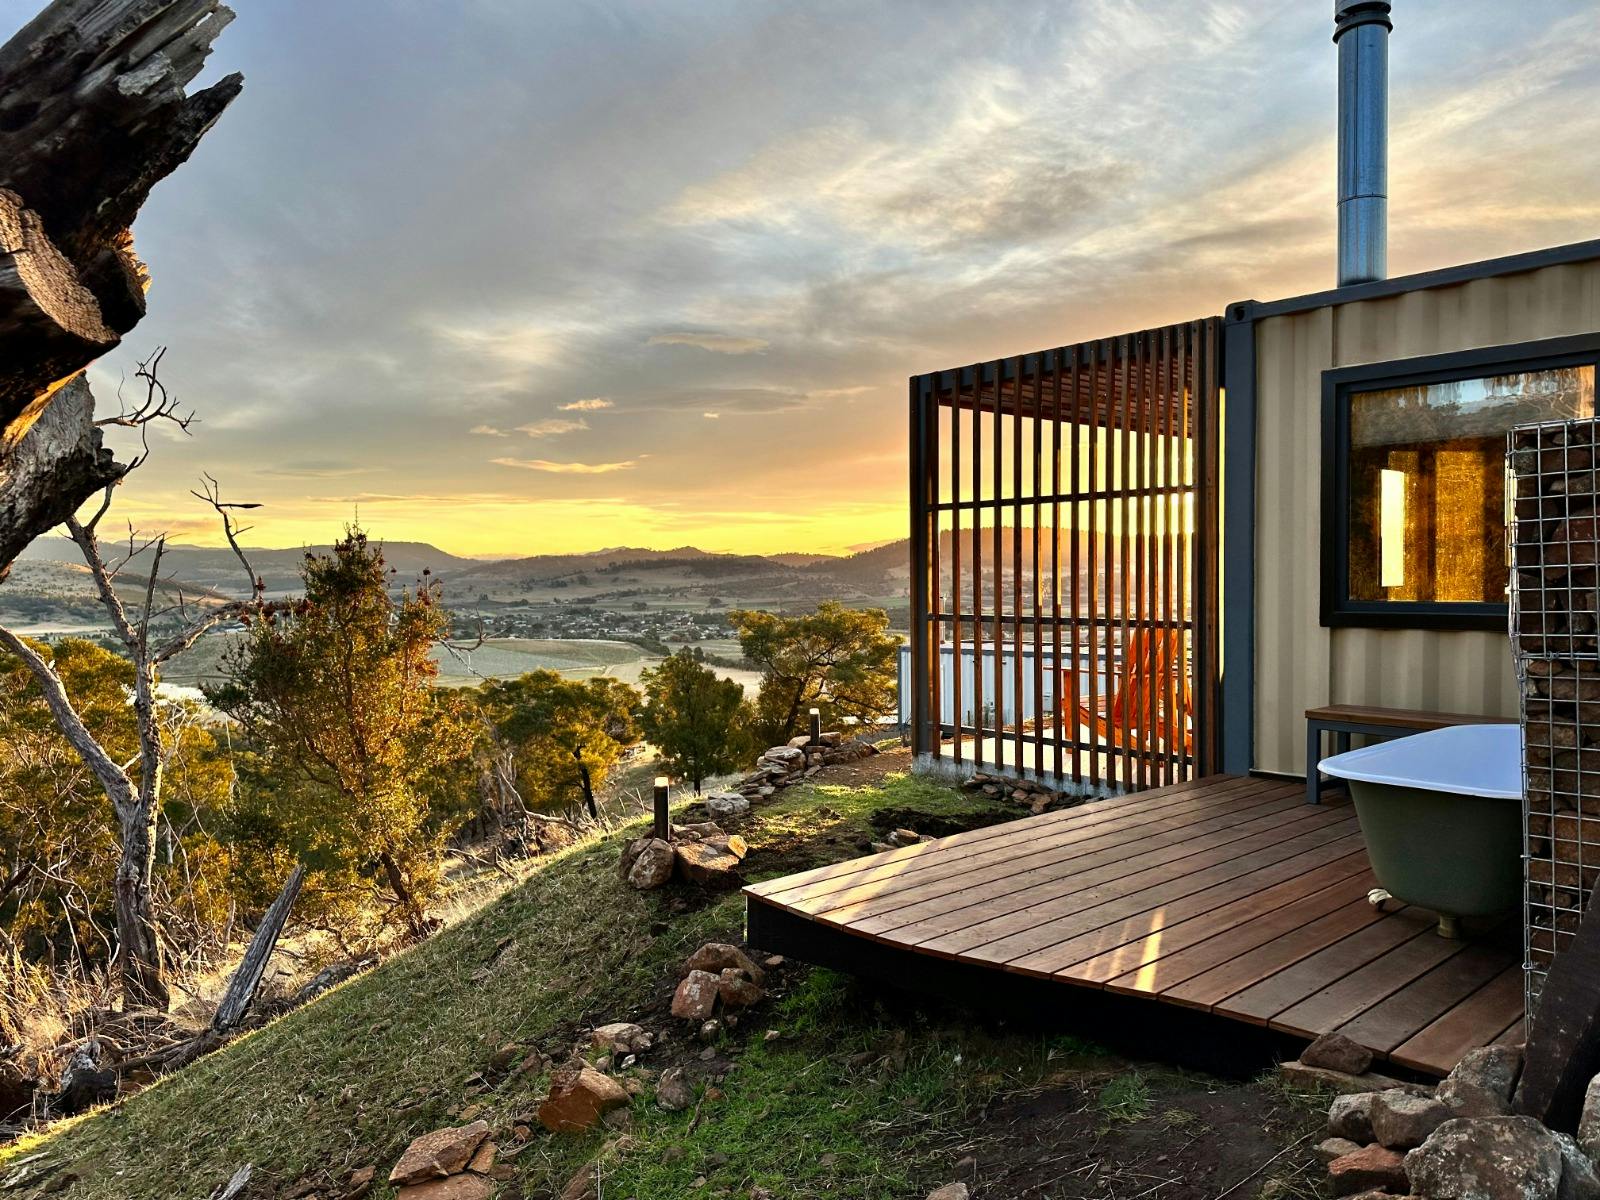 Eco-pod outdoor bath and view